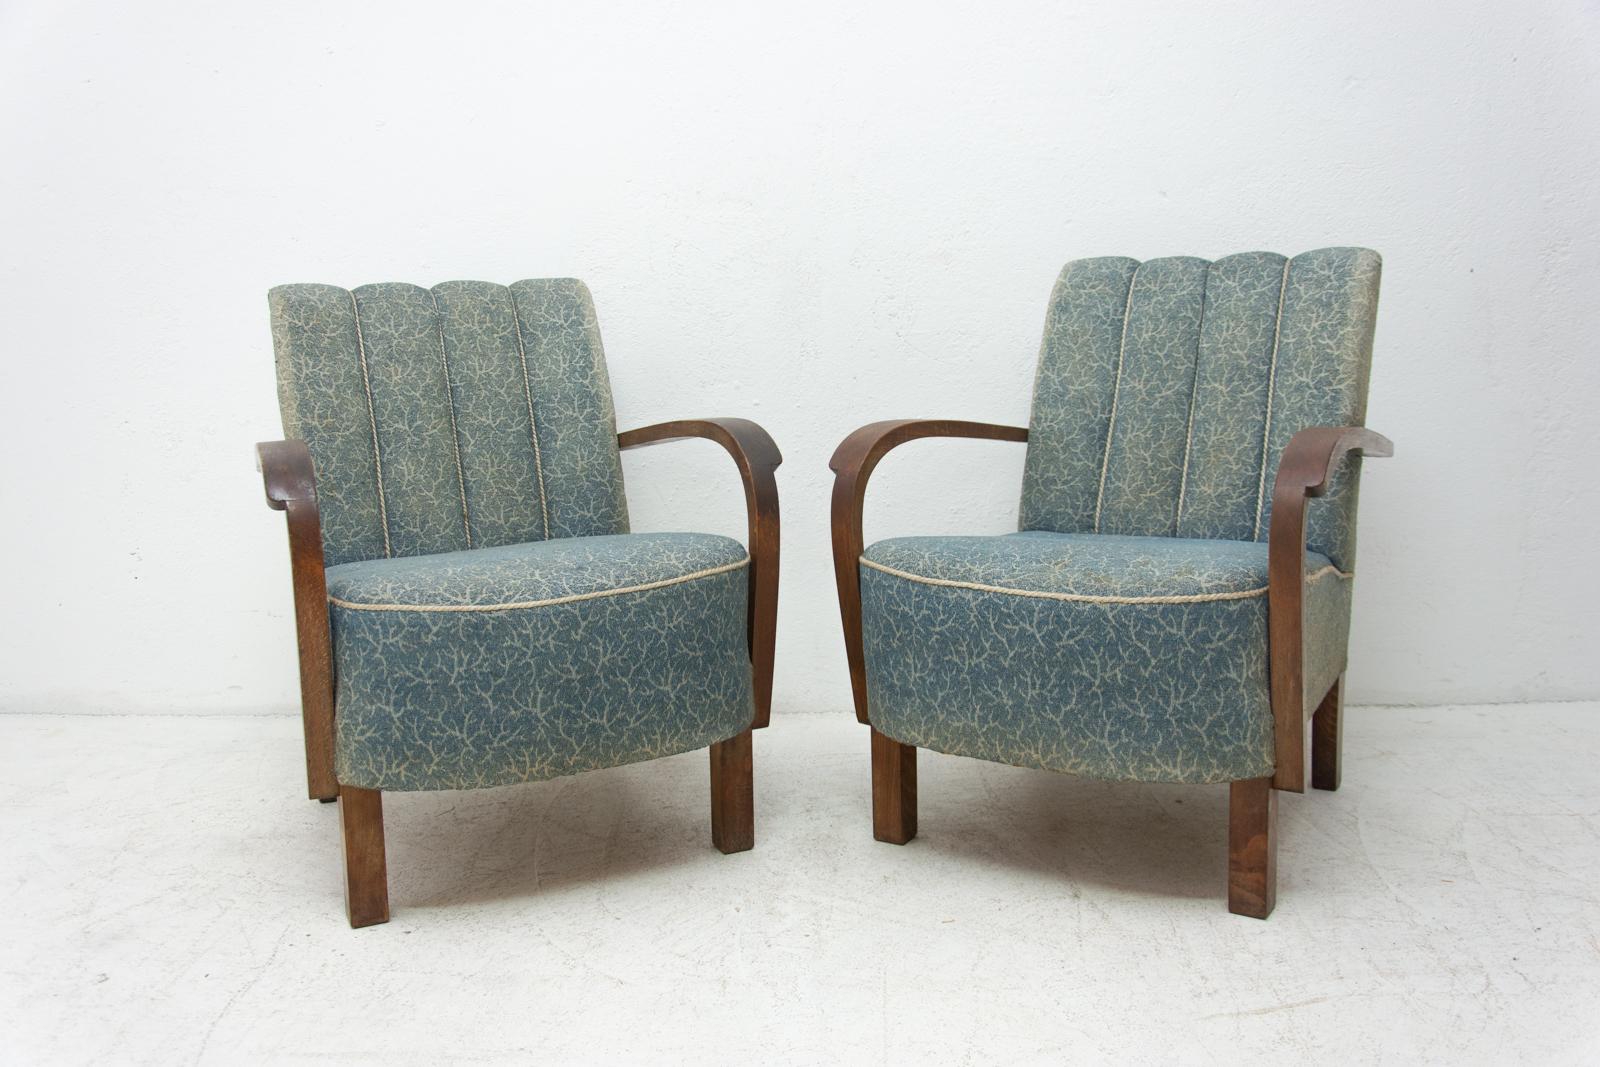 These bentwood armchairs Cataloque No. were designed by Jindrich Halabala and produced by UP Závody in the 1930s. The chairs are stable and comfortable. The structure and upholstery are in good preserved condition, the fabric is faded in places. See